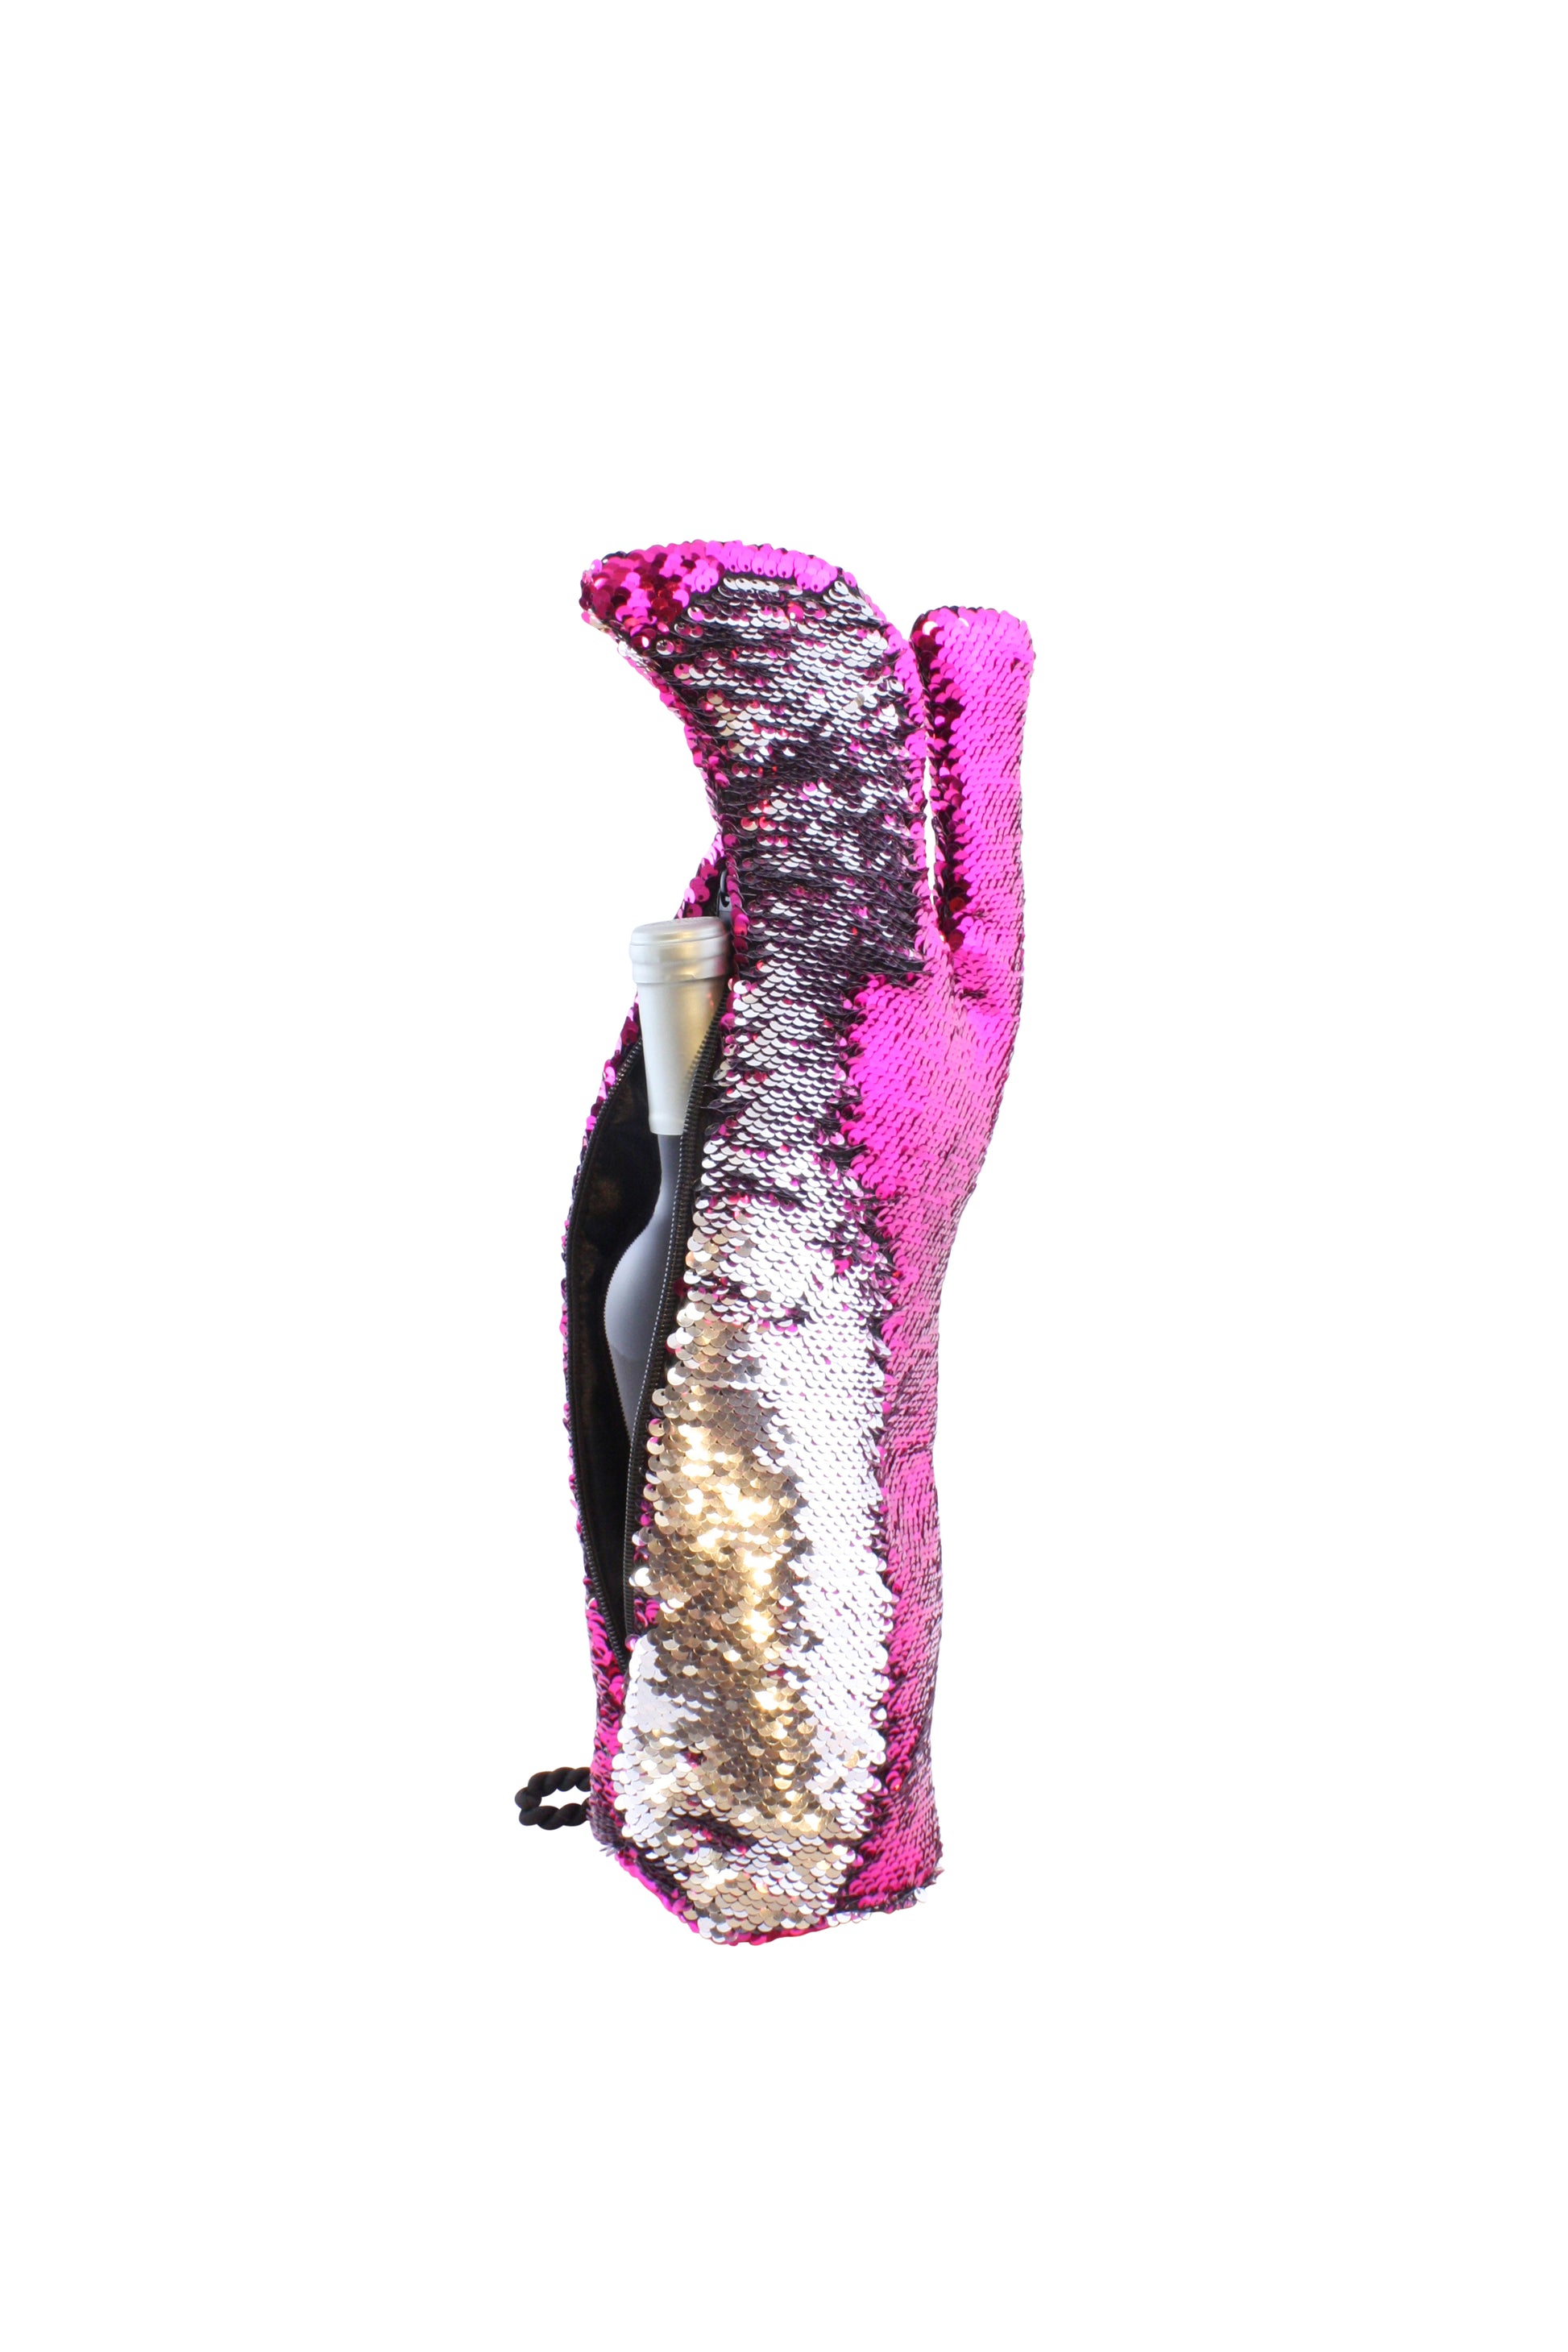 Reversible Sequin Fashion Wine Bag by Tipsy Totes